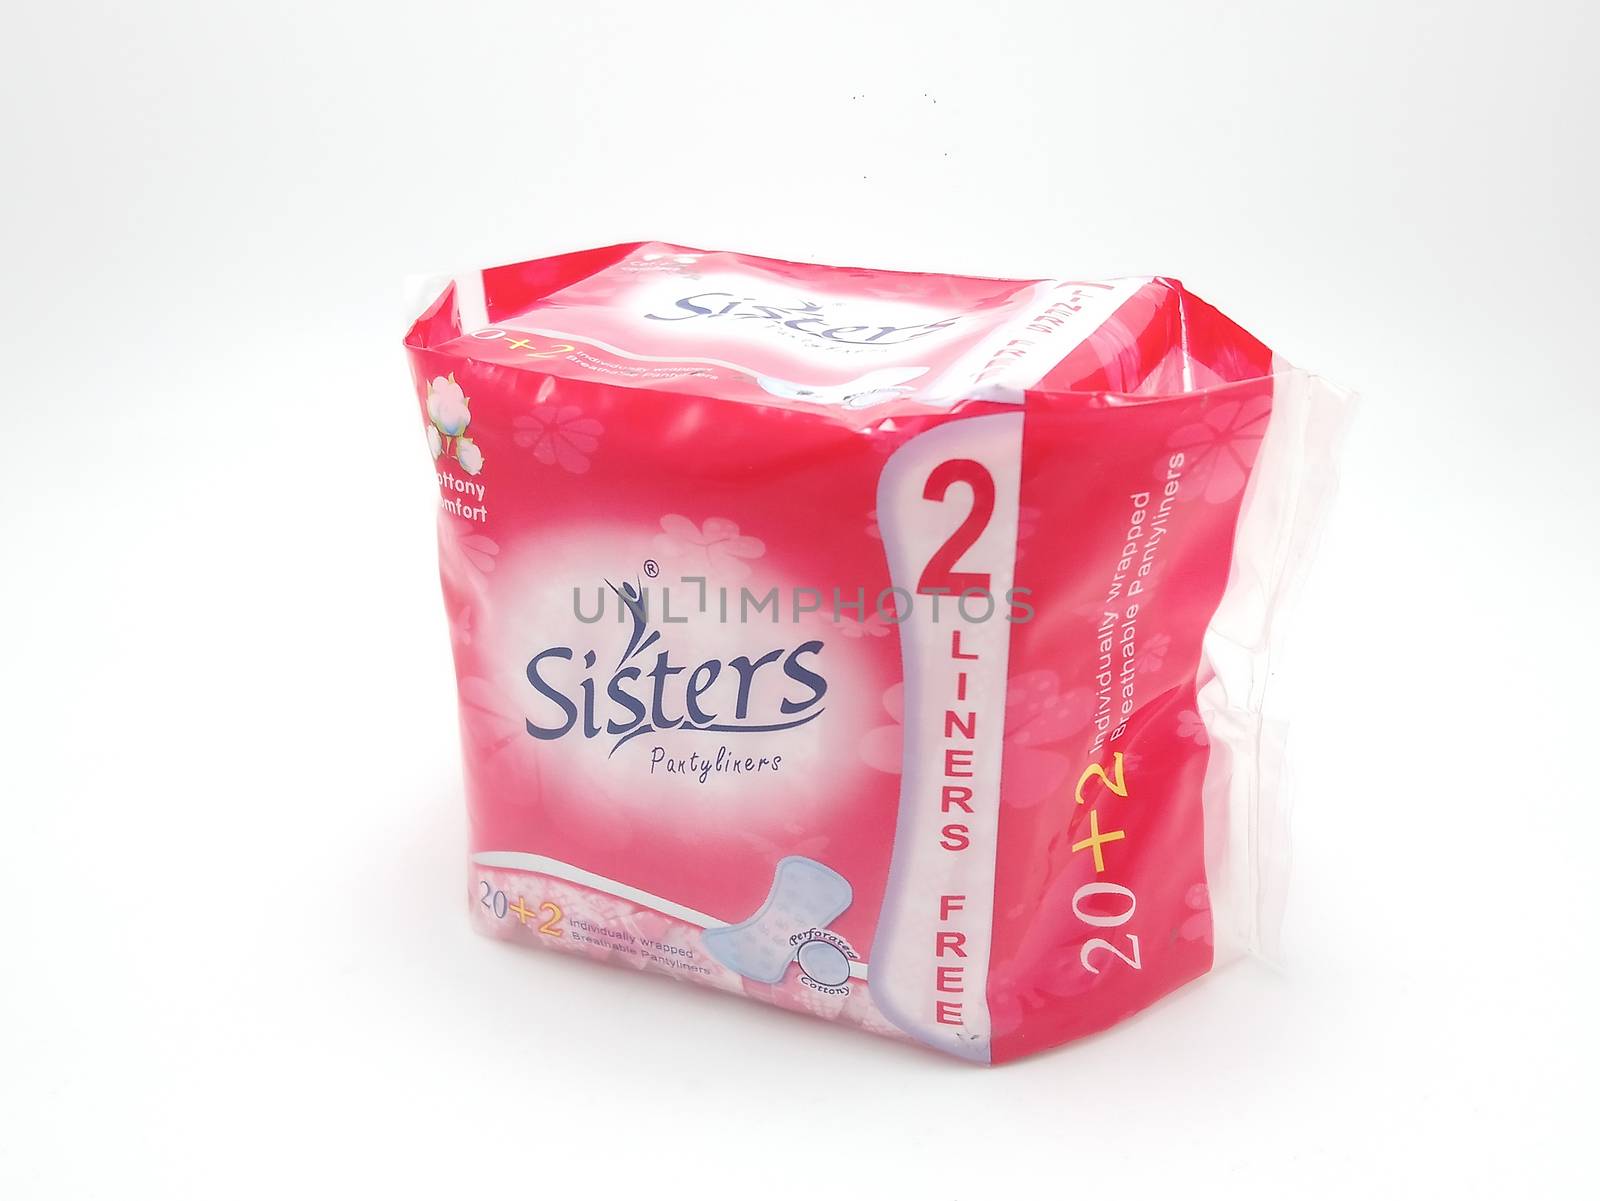 MANILA, PH - SEPT 25 - Sisters pantyliners for women on September 25, 2020 in Manila, Philippines.